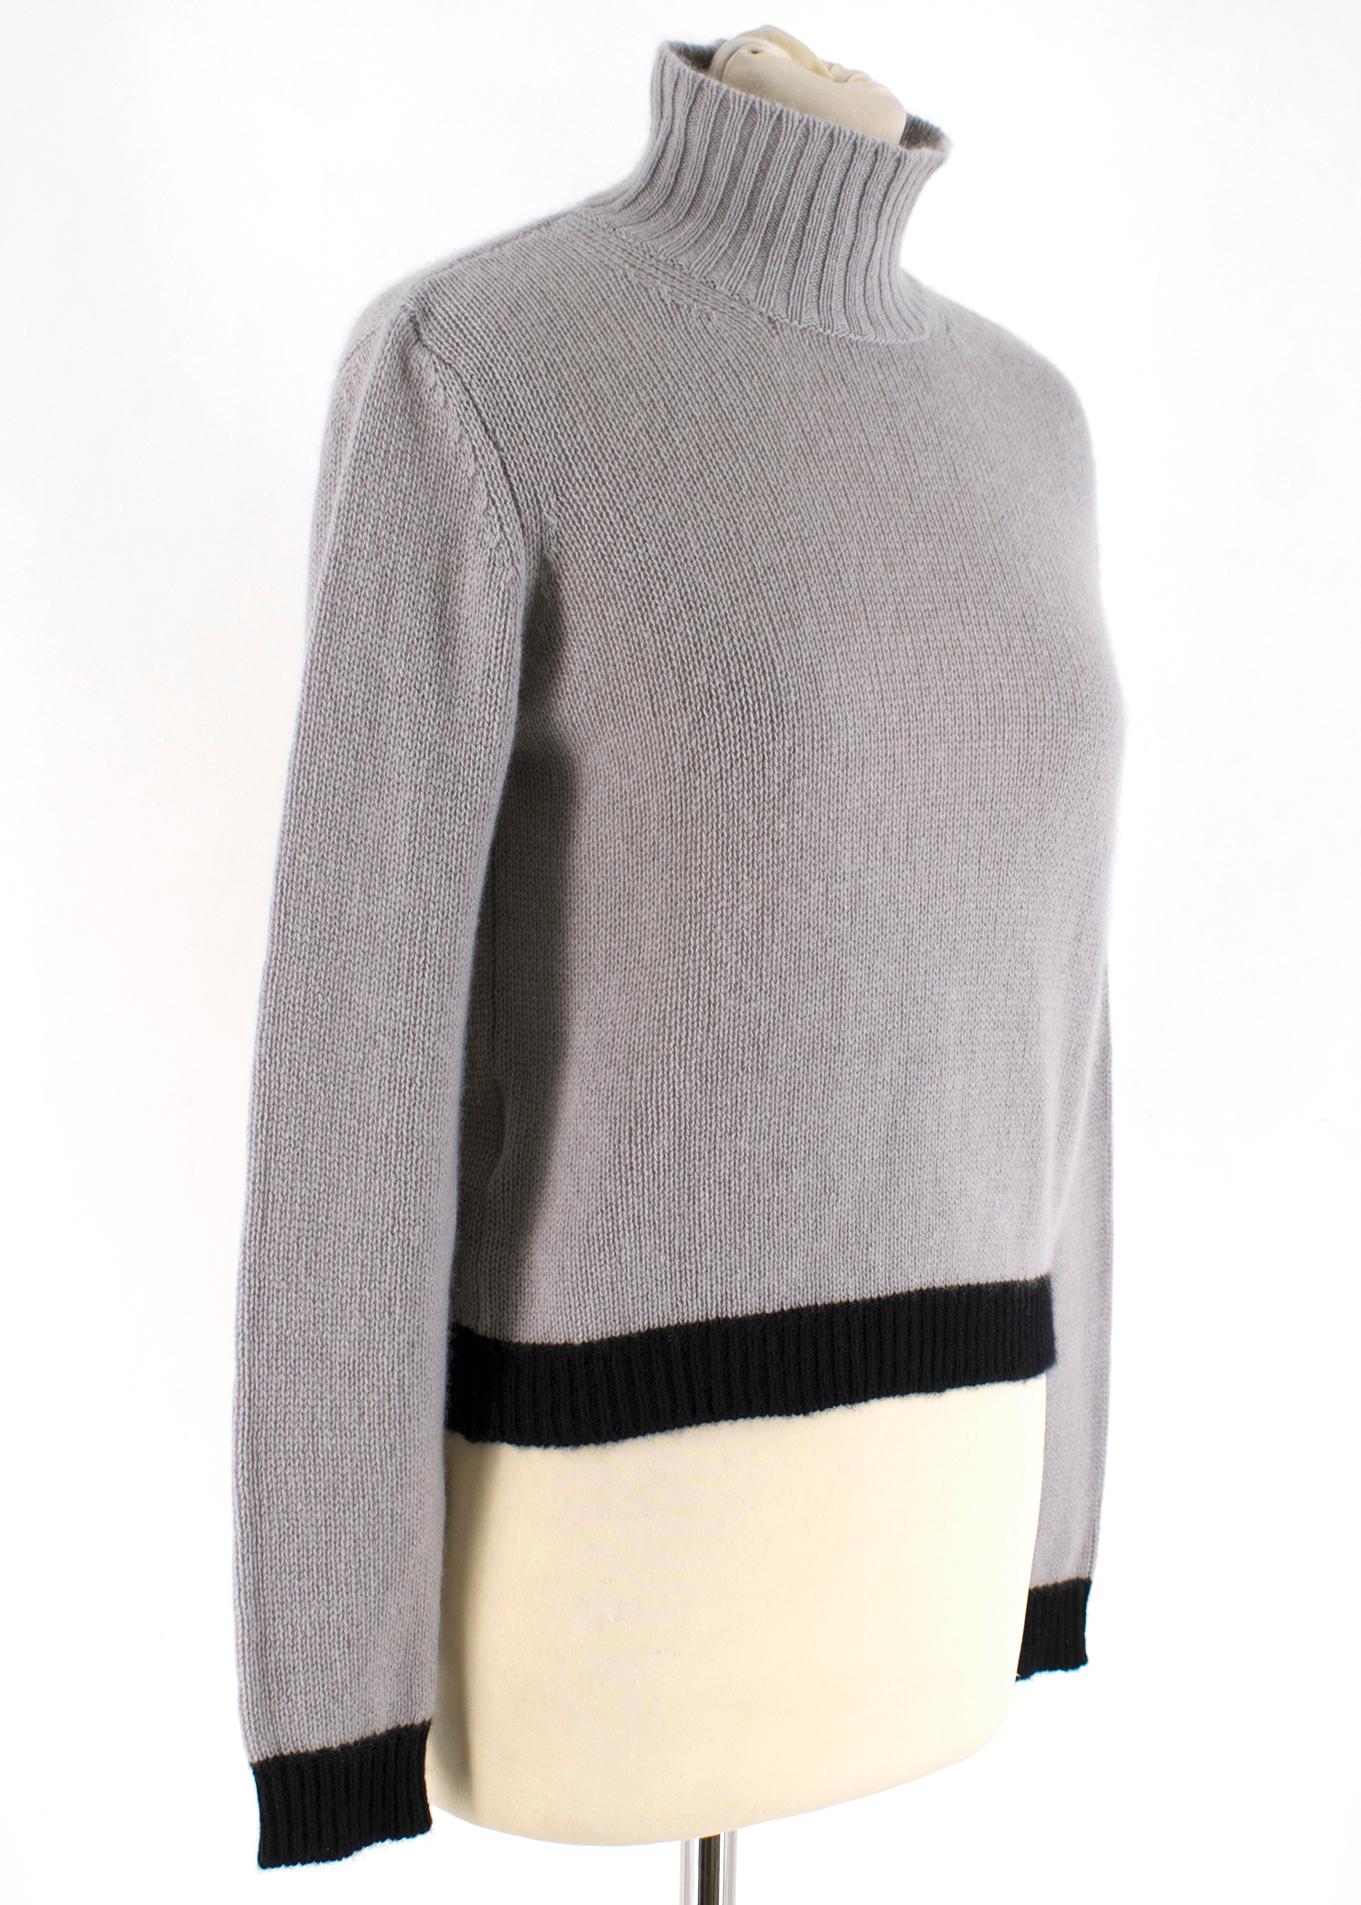 Marni Grey Cashmere Jumper RRP £595.00

- High neckline 
- Long Sleeves 
- Straight Hemline 
- Black Contrast Detail on Hemline and Cuffs

100% Cashmere 

Made in Italy 

Please note, these items are pre-owned and may show signs of being stored even